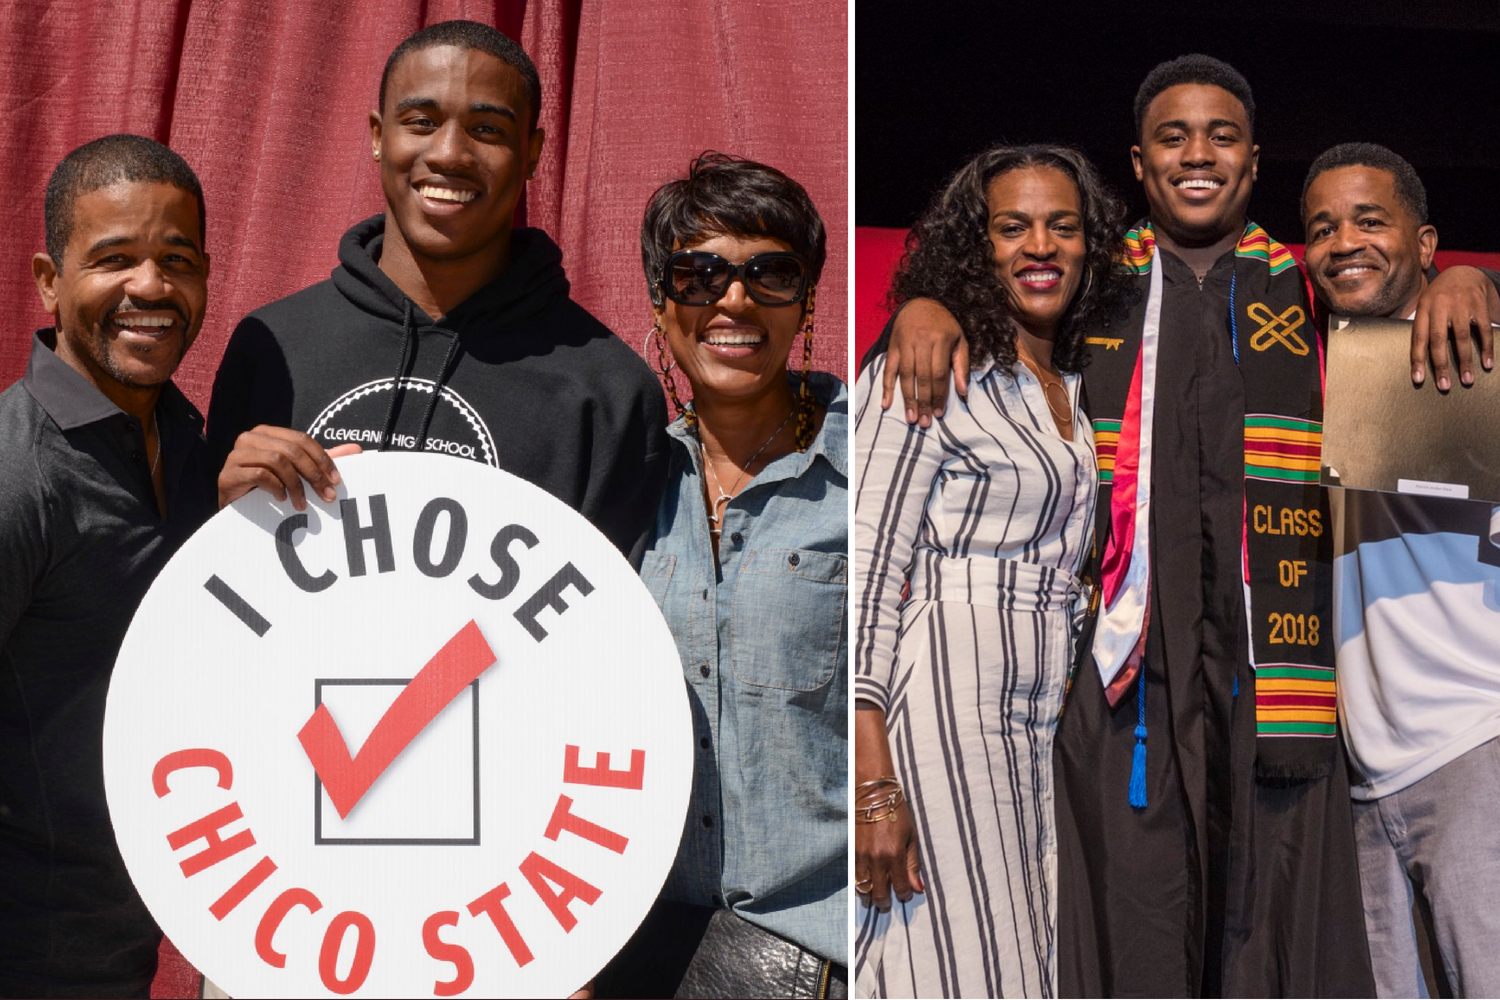 Patrick Pace is seen with his parents in 2014, as a prospective student deciding to "Choose Chico," and four years later as as a graduate.